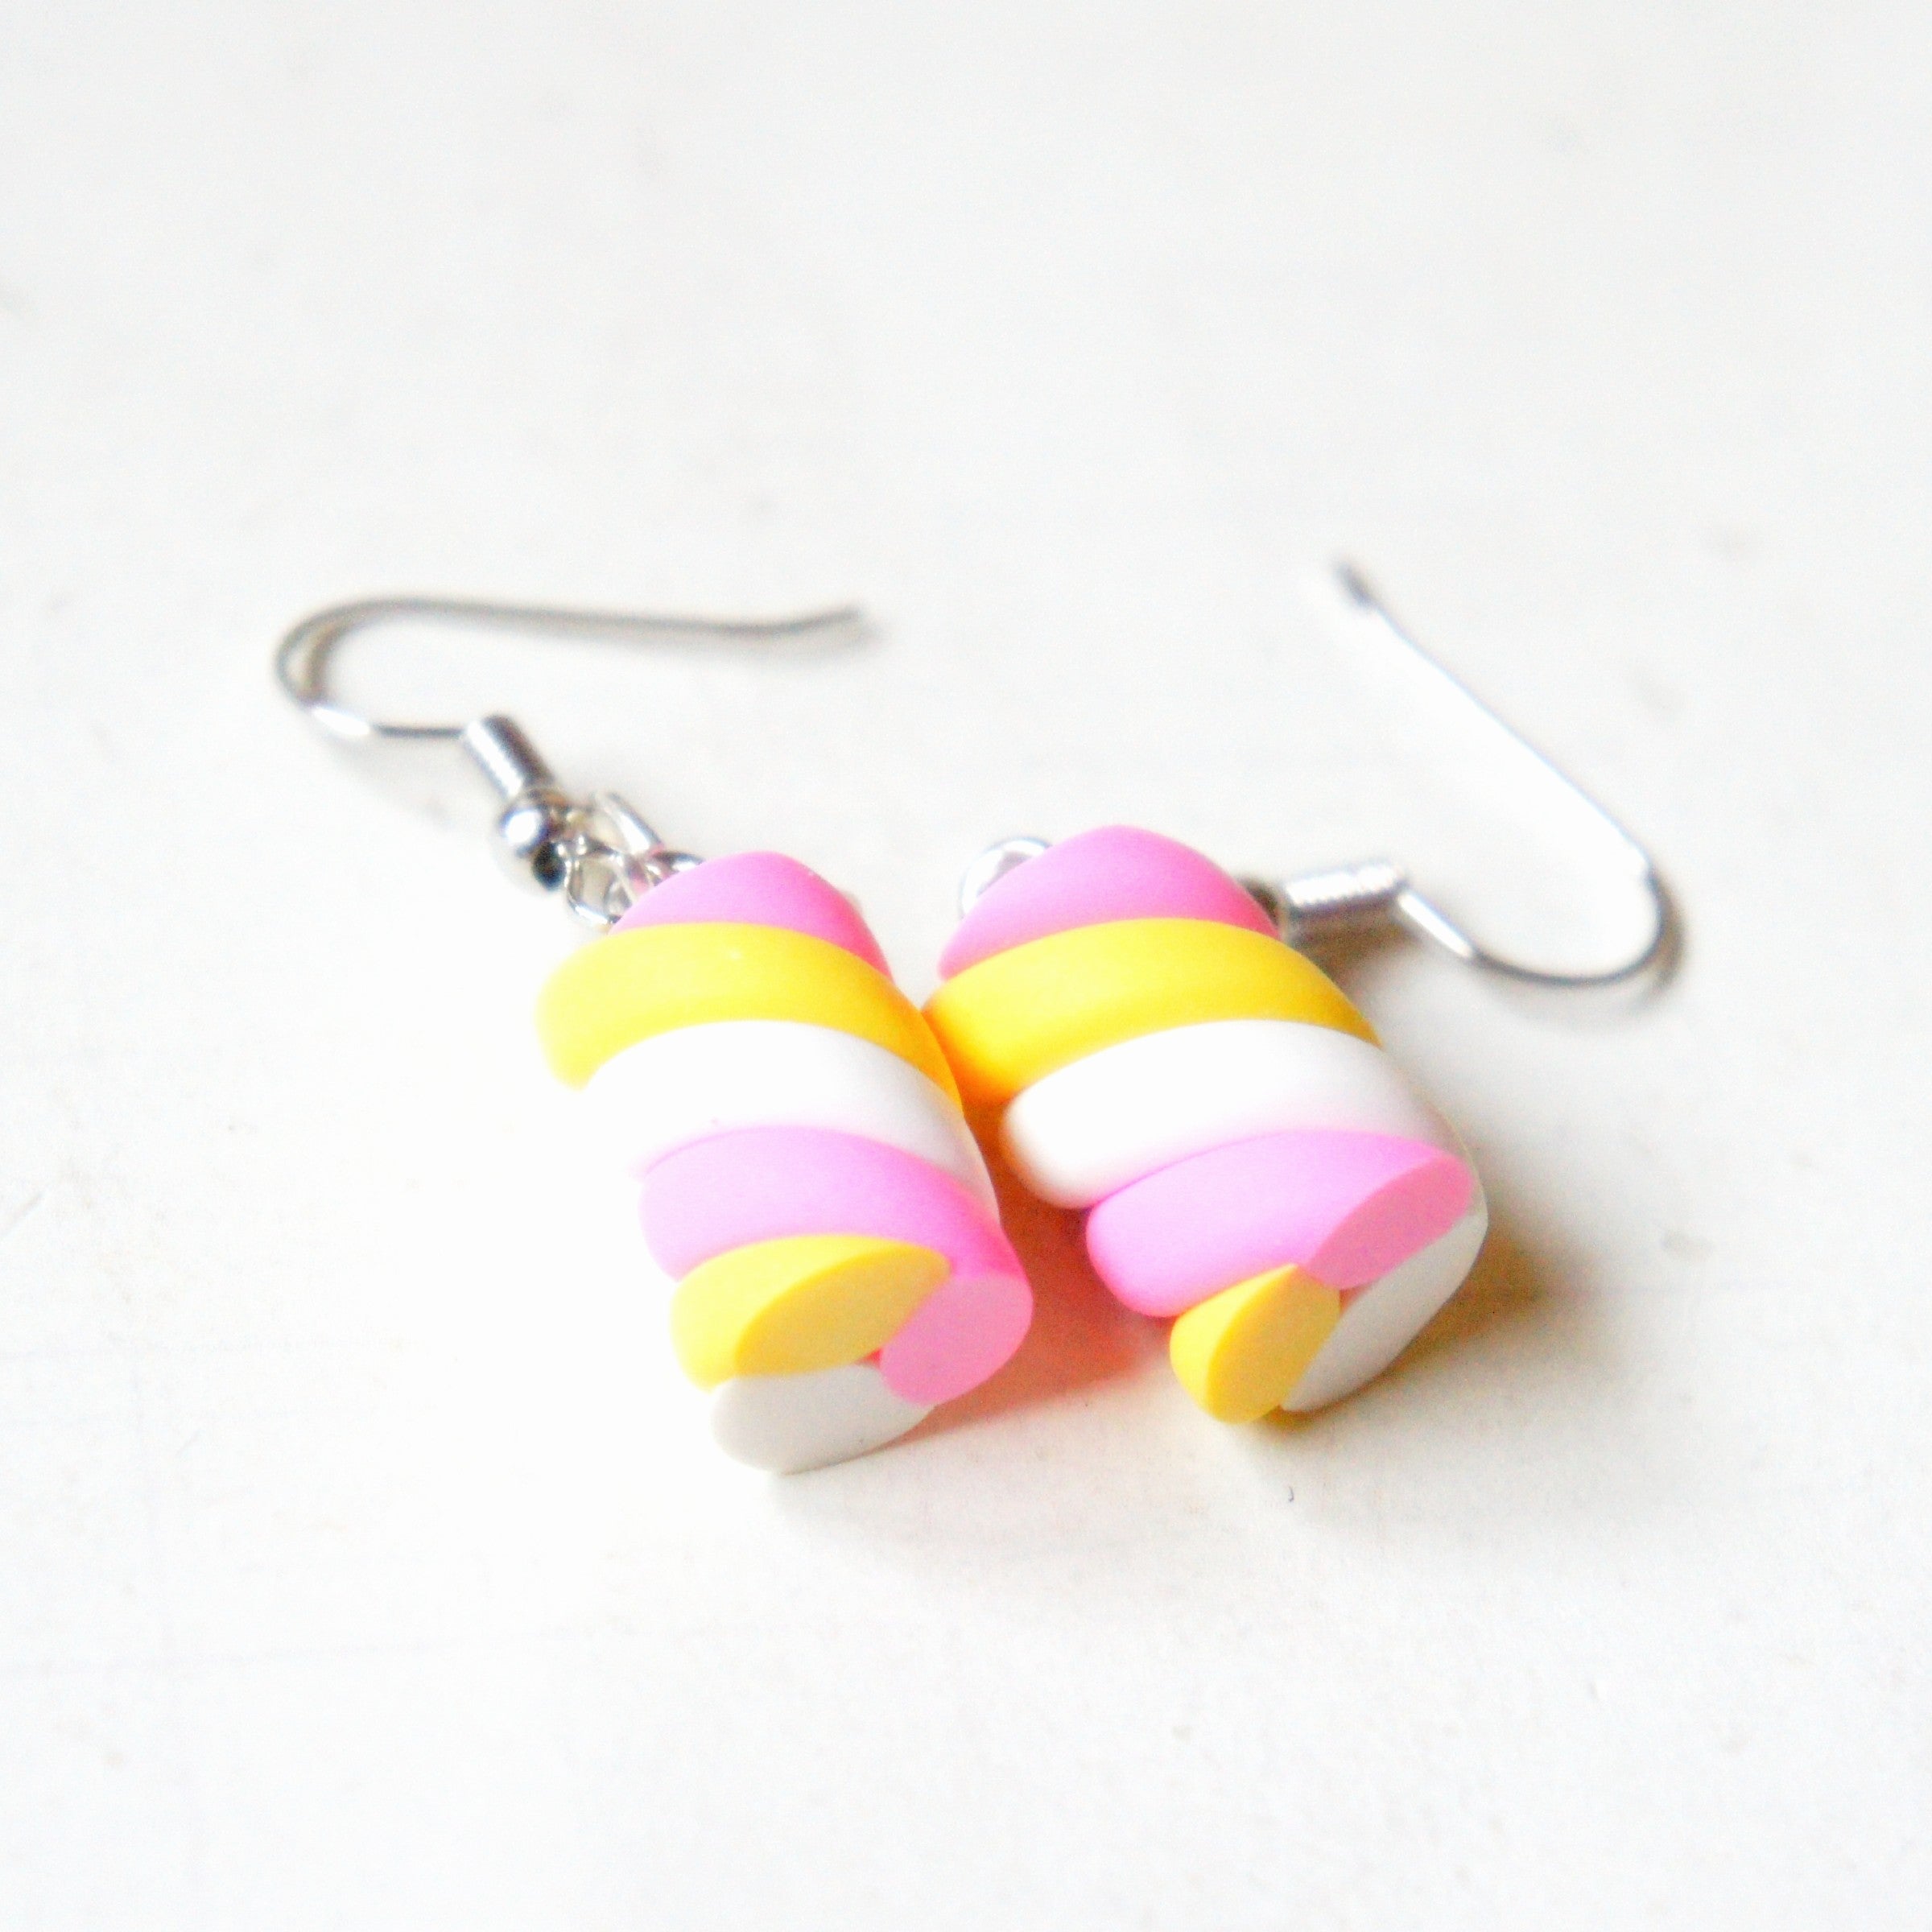 Marshmallow Dangle Earrings - Jillicious charms and accessories